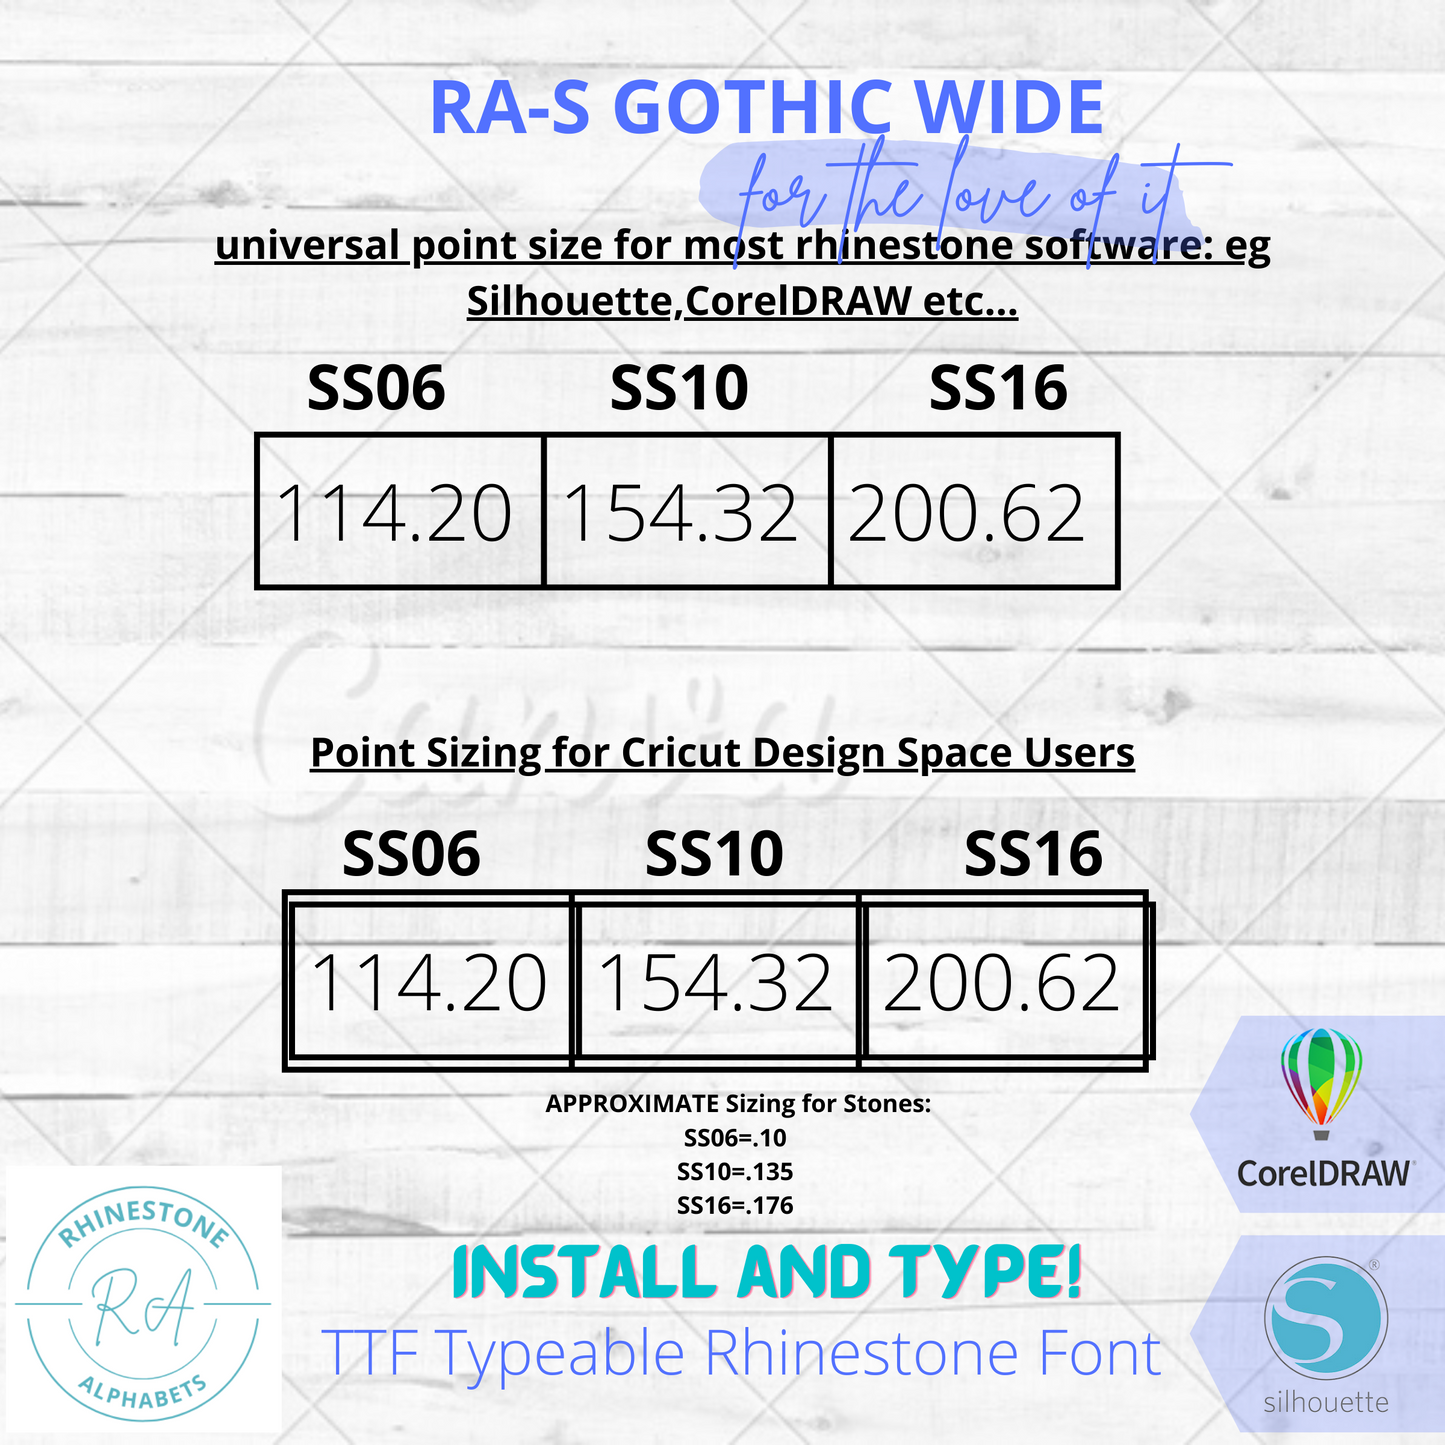 RA-S Gothic Wide